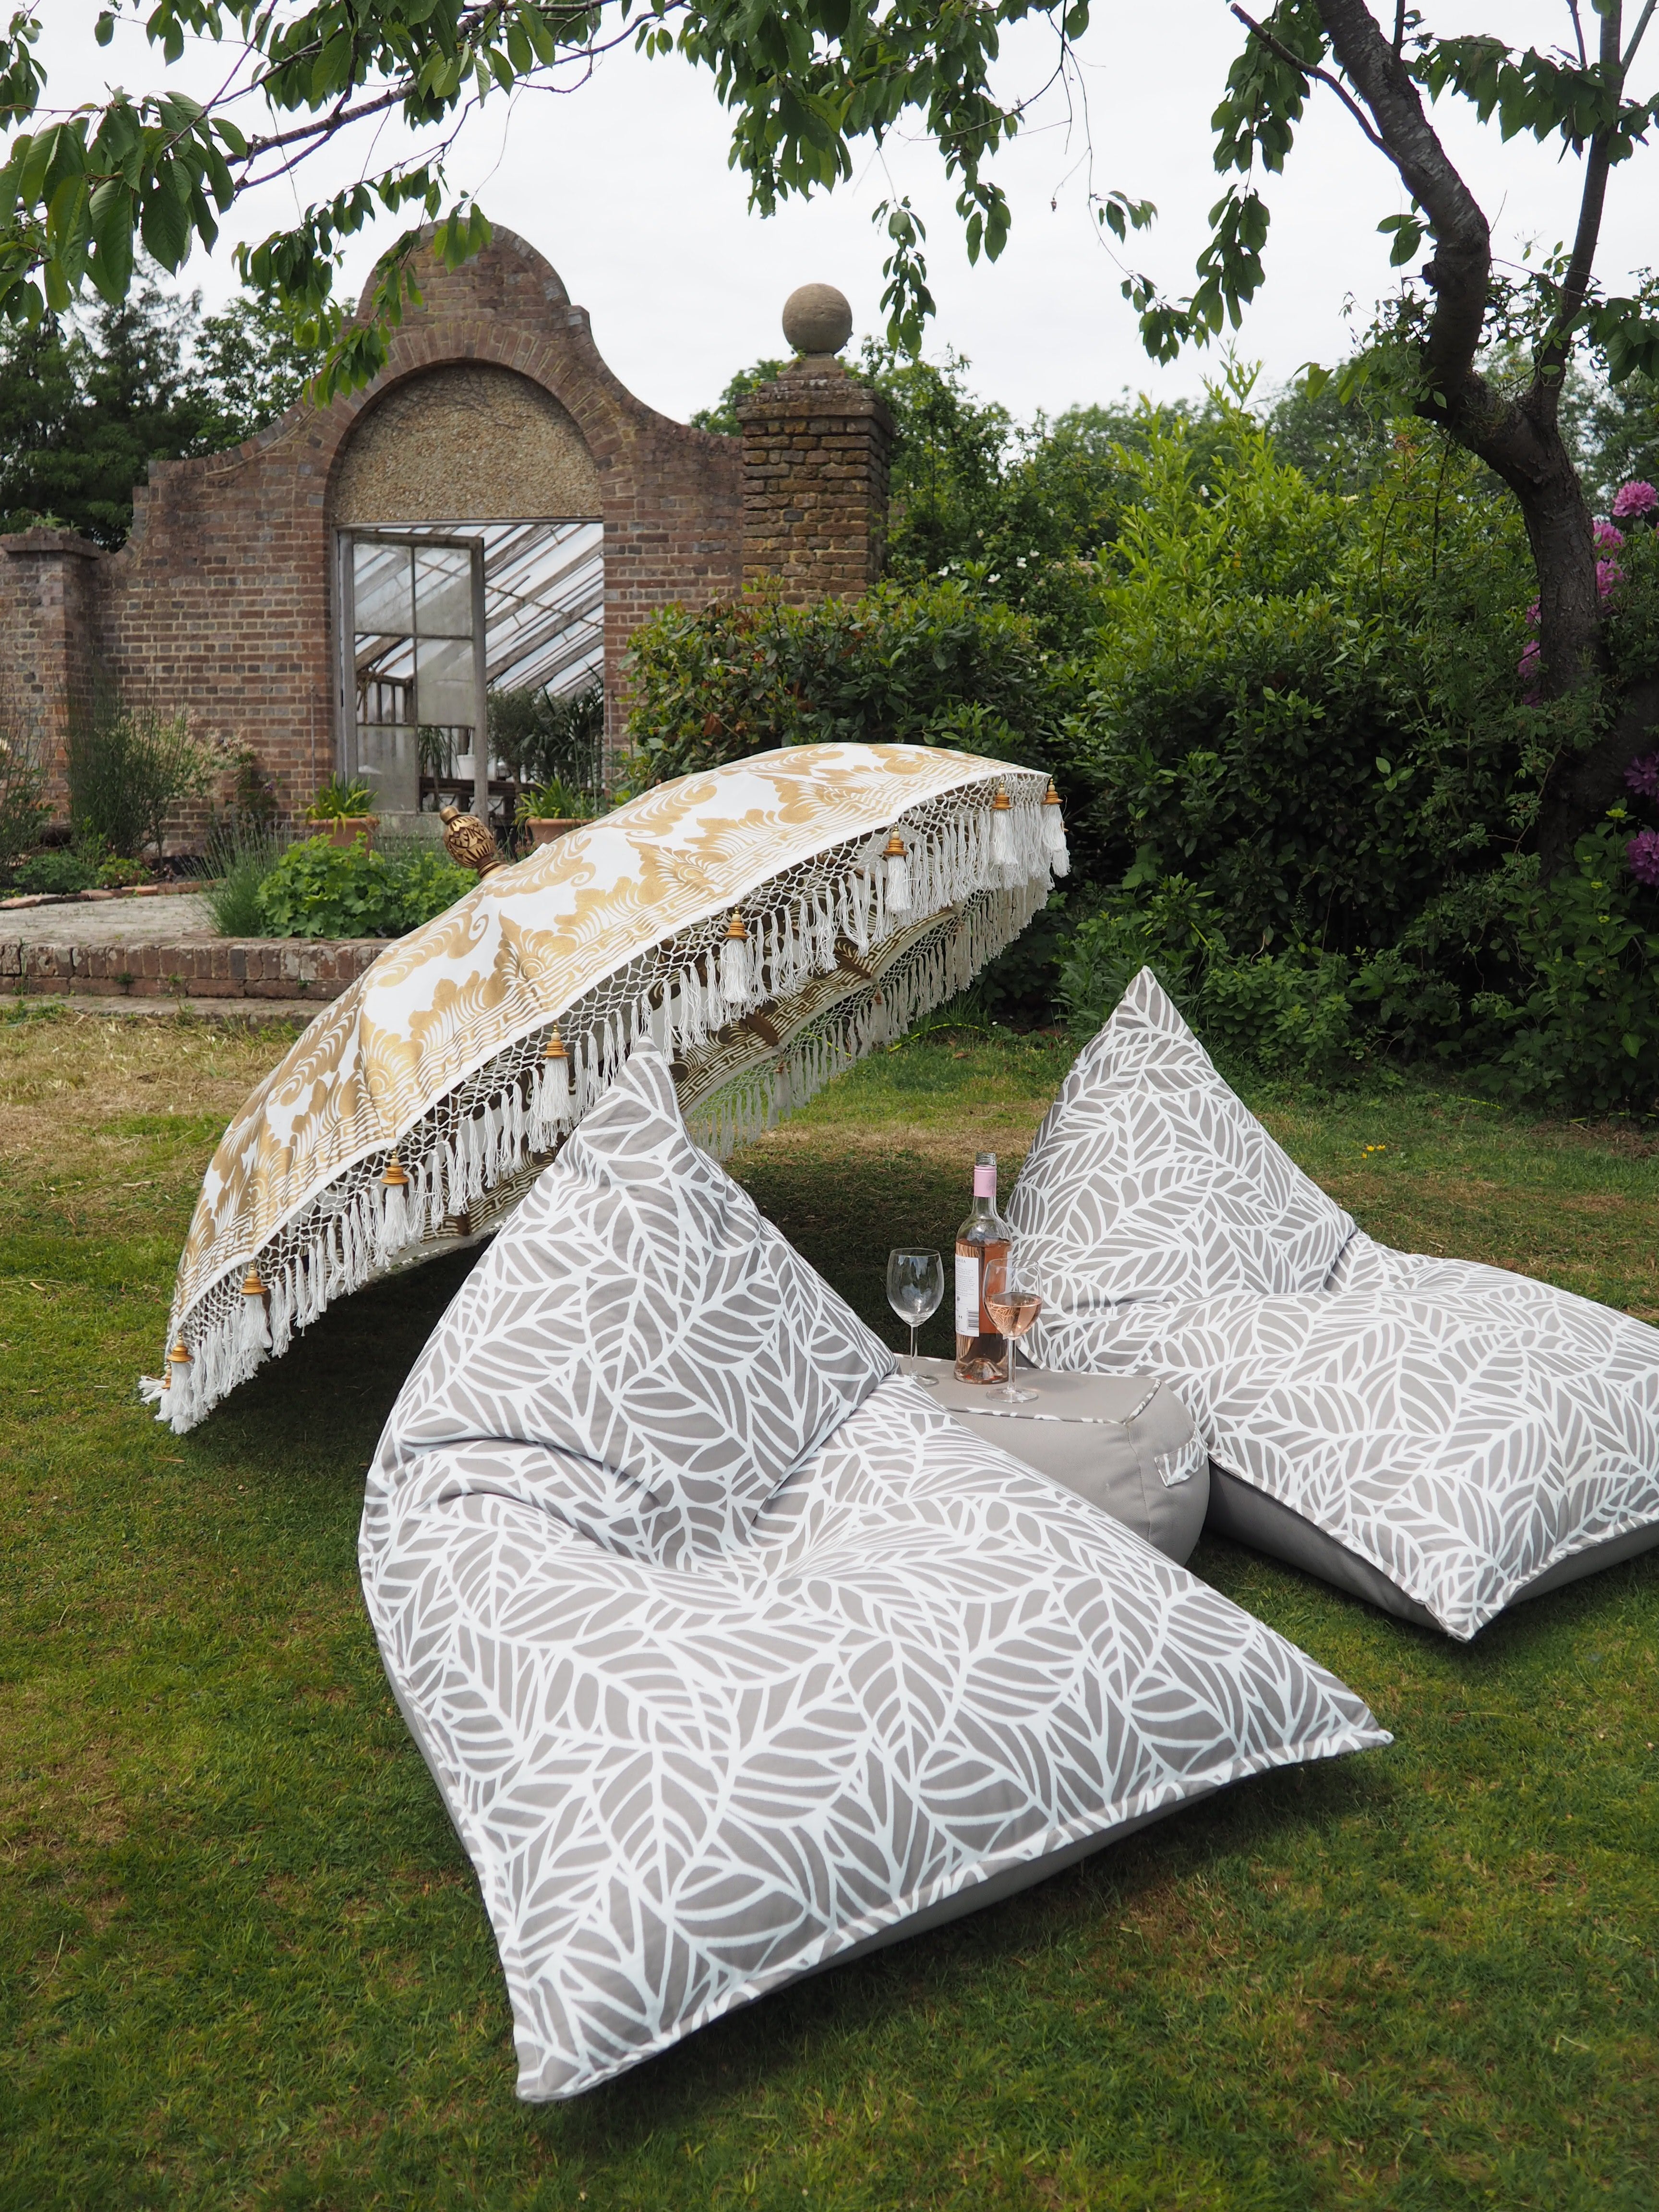 Two outdoor bean bag loungers look inviting on the lawn